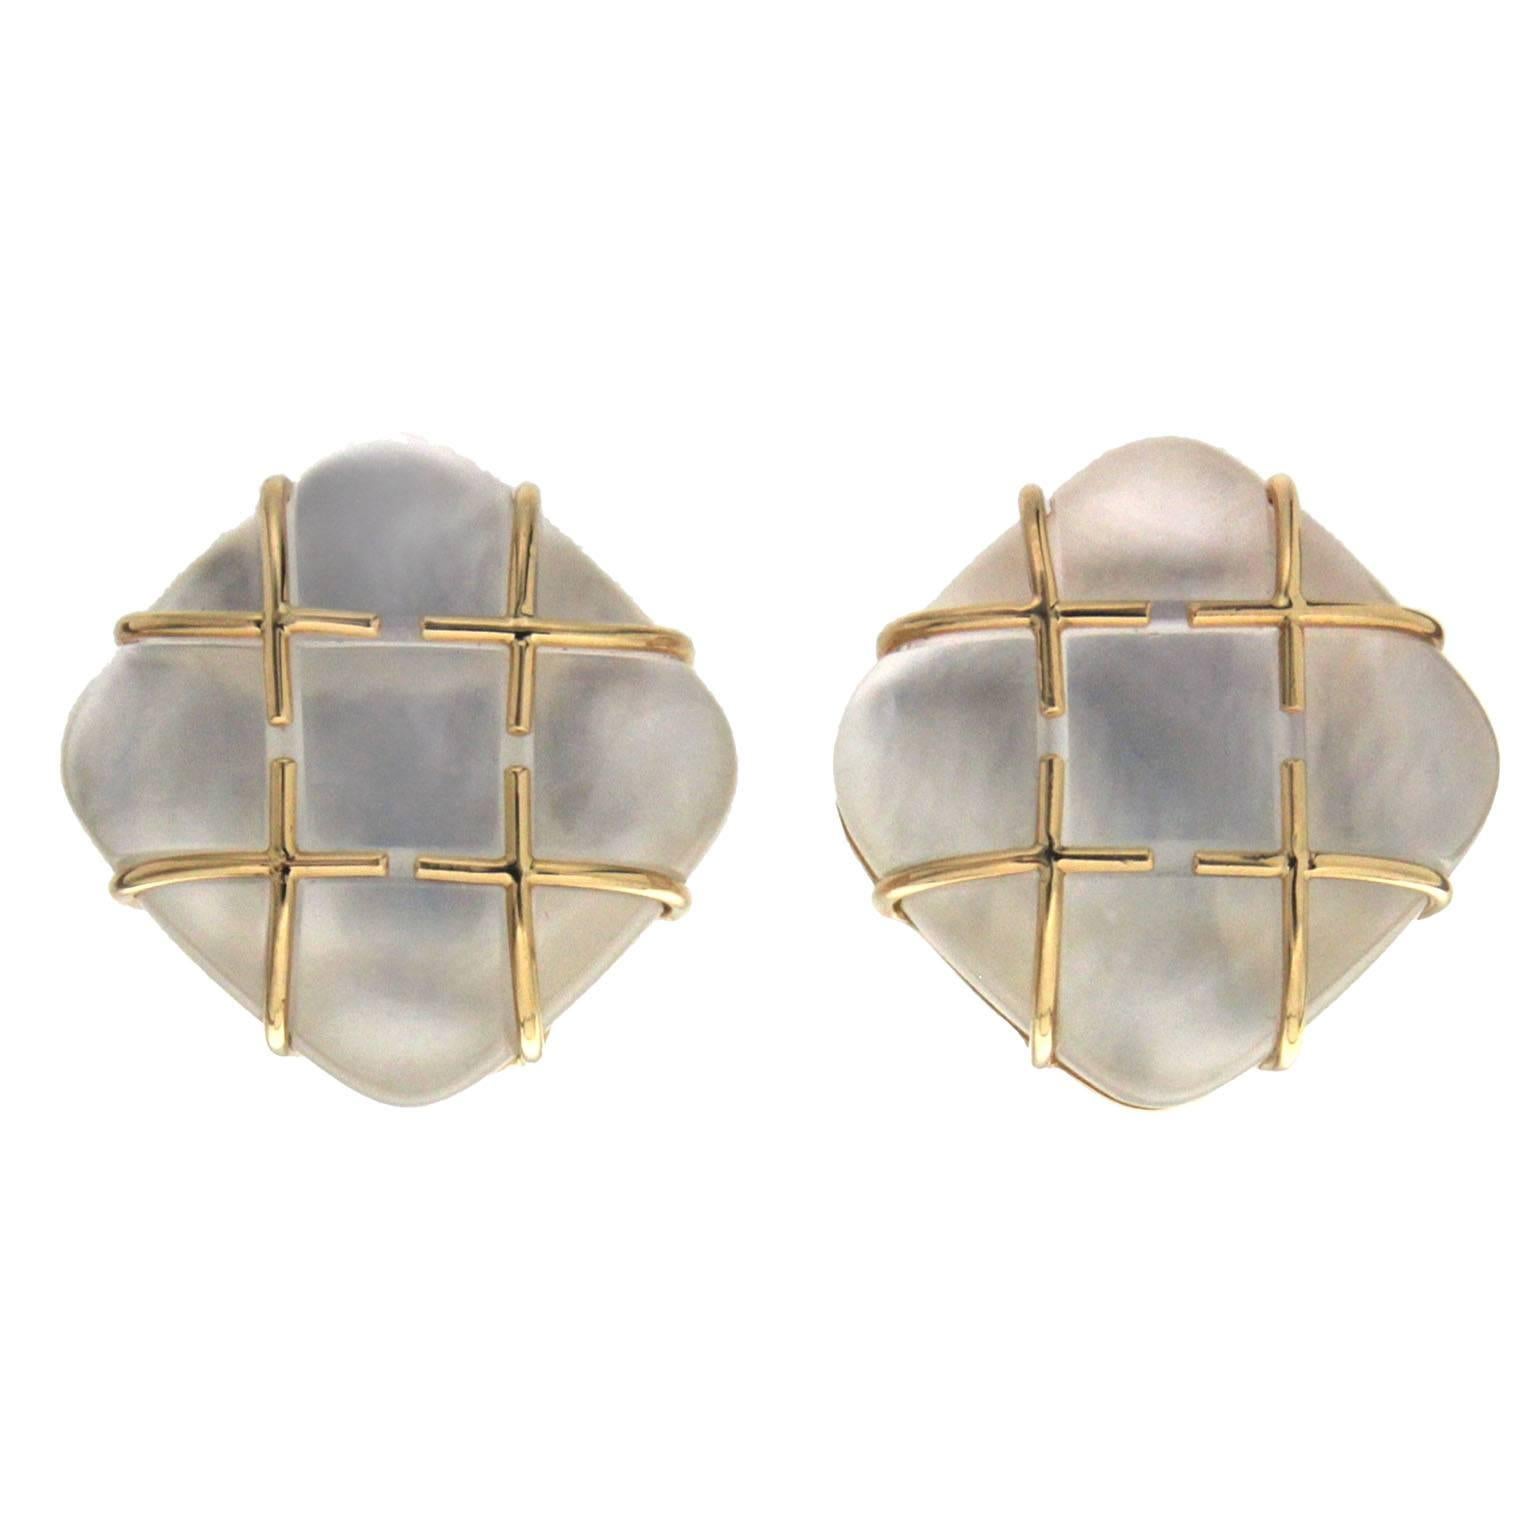 Valentin Magro Tic Tac Toe Cushion Crystal Mother-of-Pearl Gold Earrings